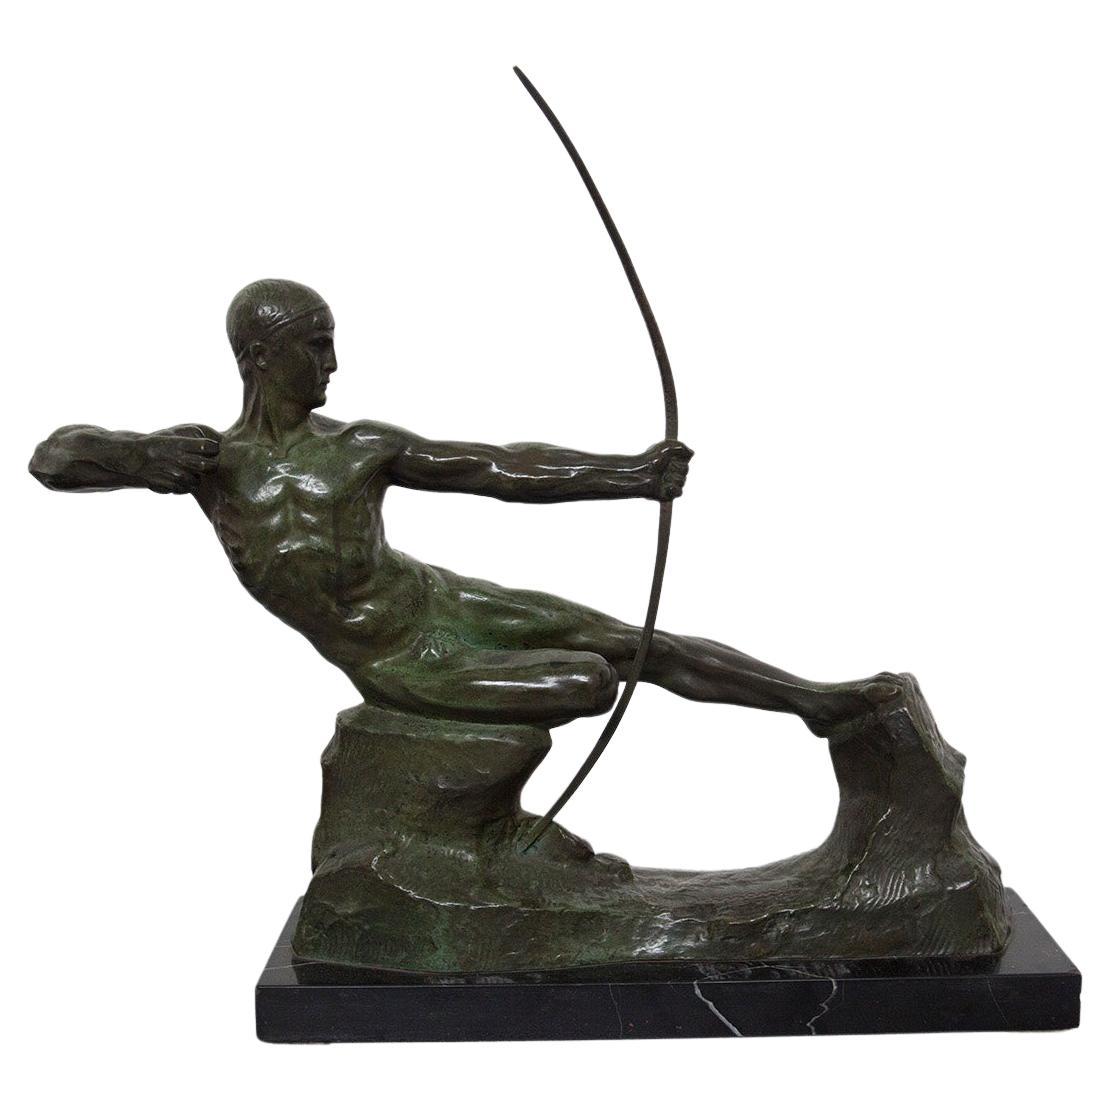 Victor Demanet Sculpture "the Archer" in Bronze, Signed 1925 For Sale